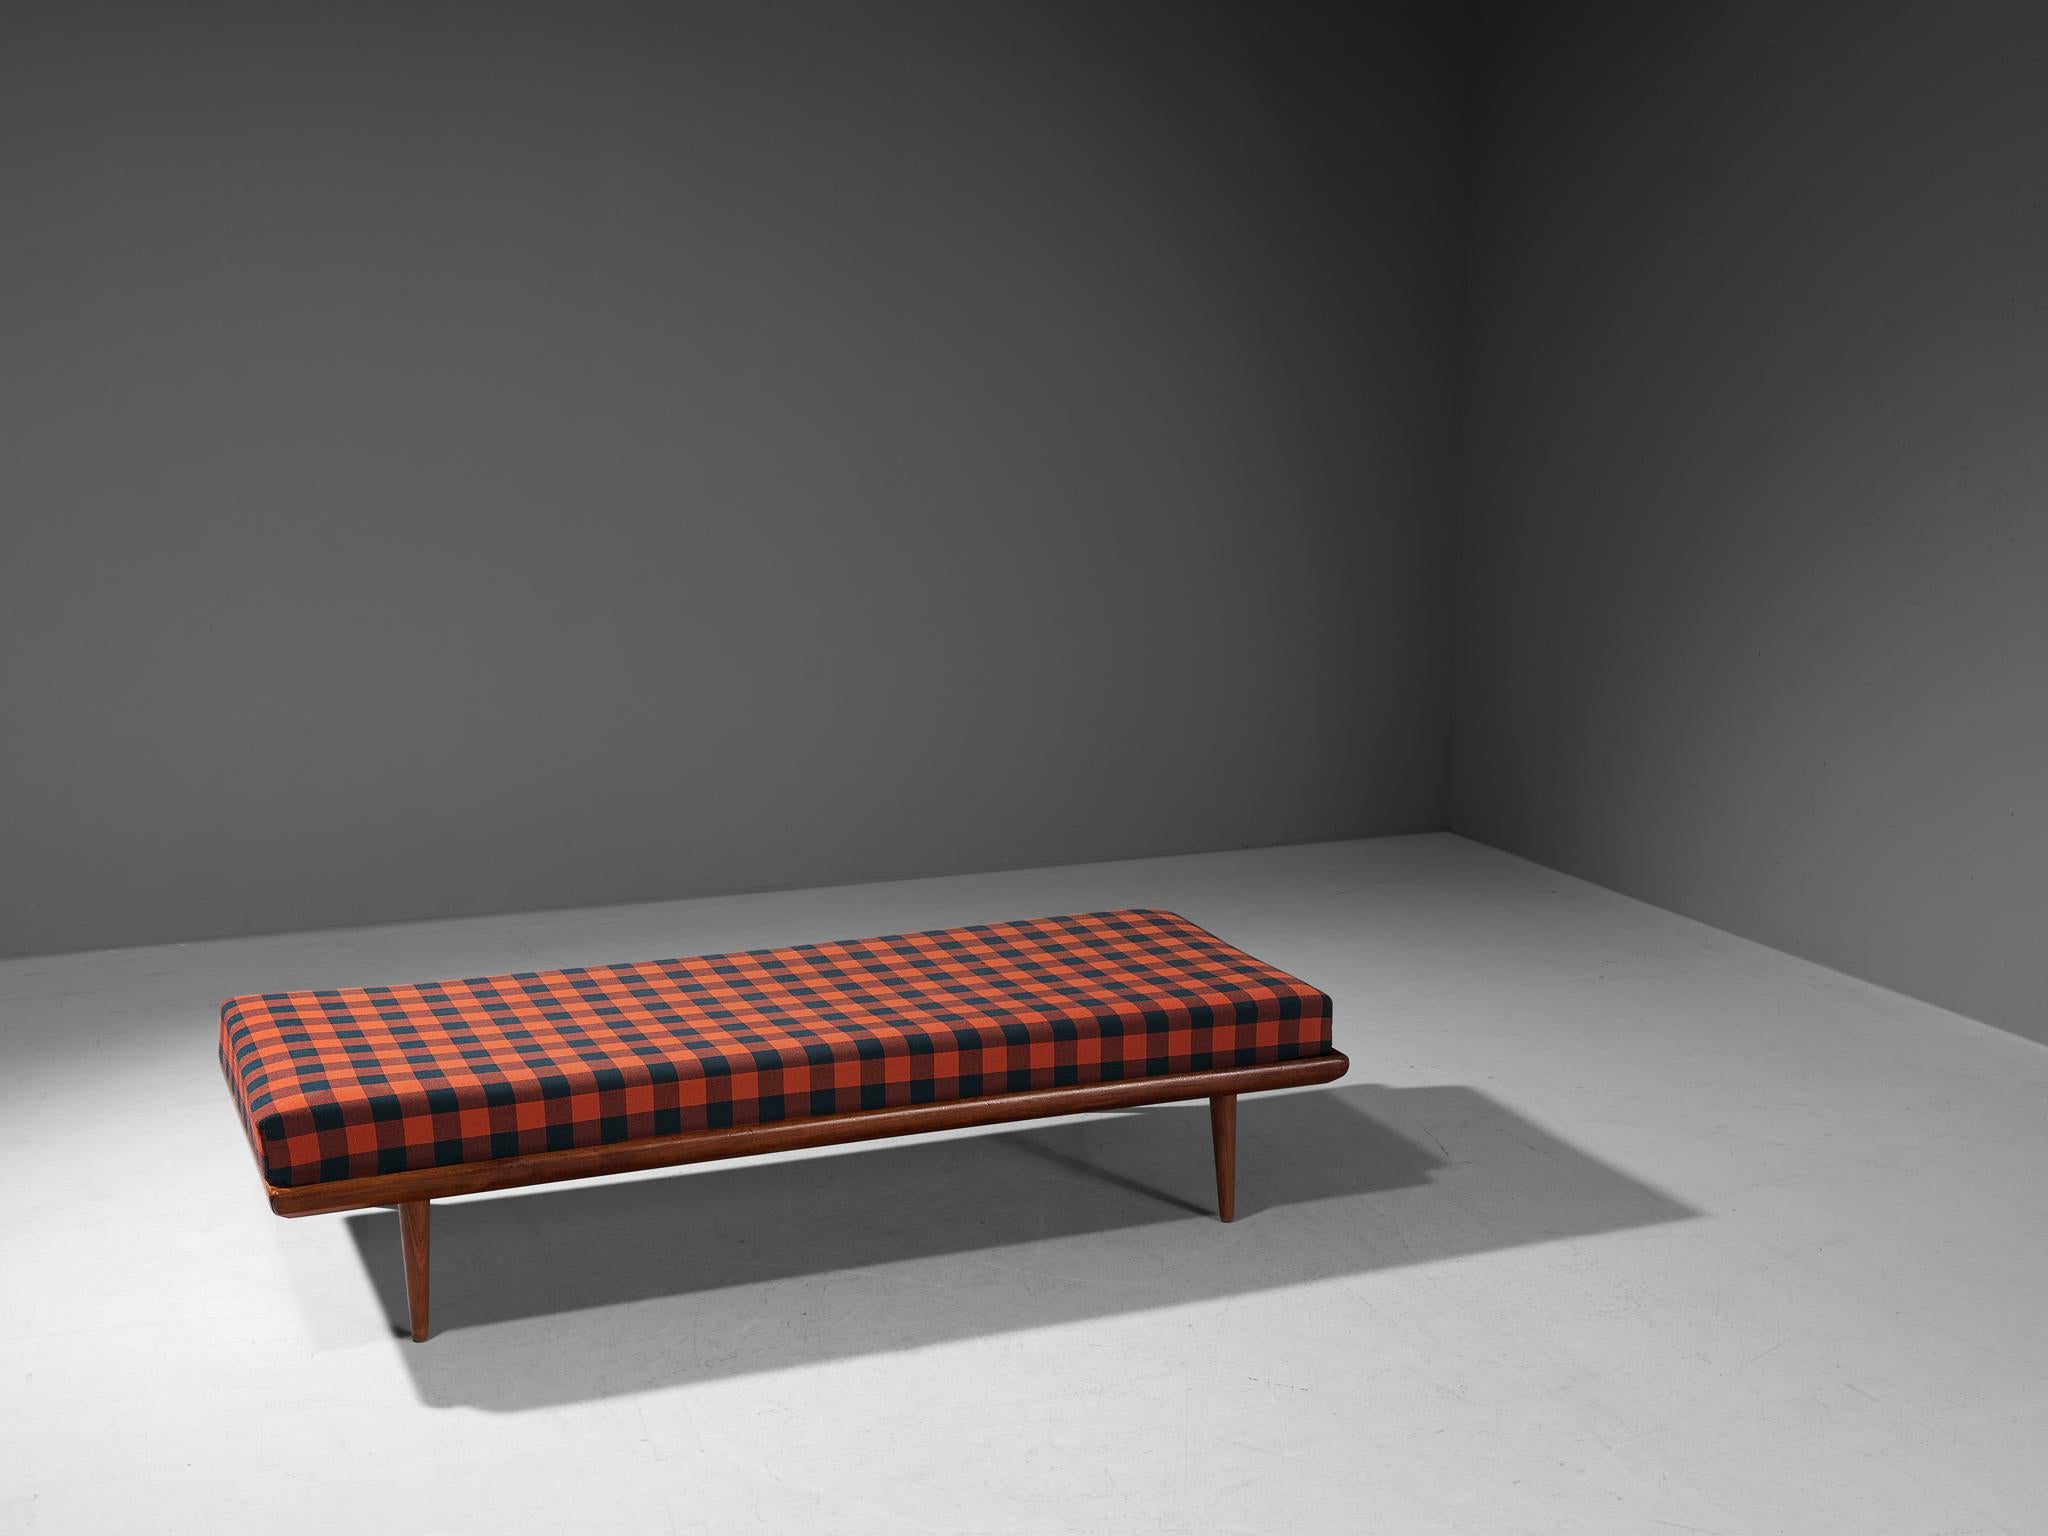 Peter Hvidt and Orla Mølgaard-Nielsen for France & Søn, 'Minerva' daybed, teak, metal, fabric, Denmark, design 1957, production 1960s.

This elegant daybed or sofa is named 'Minerva' after the goddess of wisdom; a true midcentury classic designed by